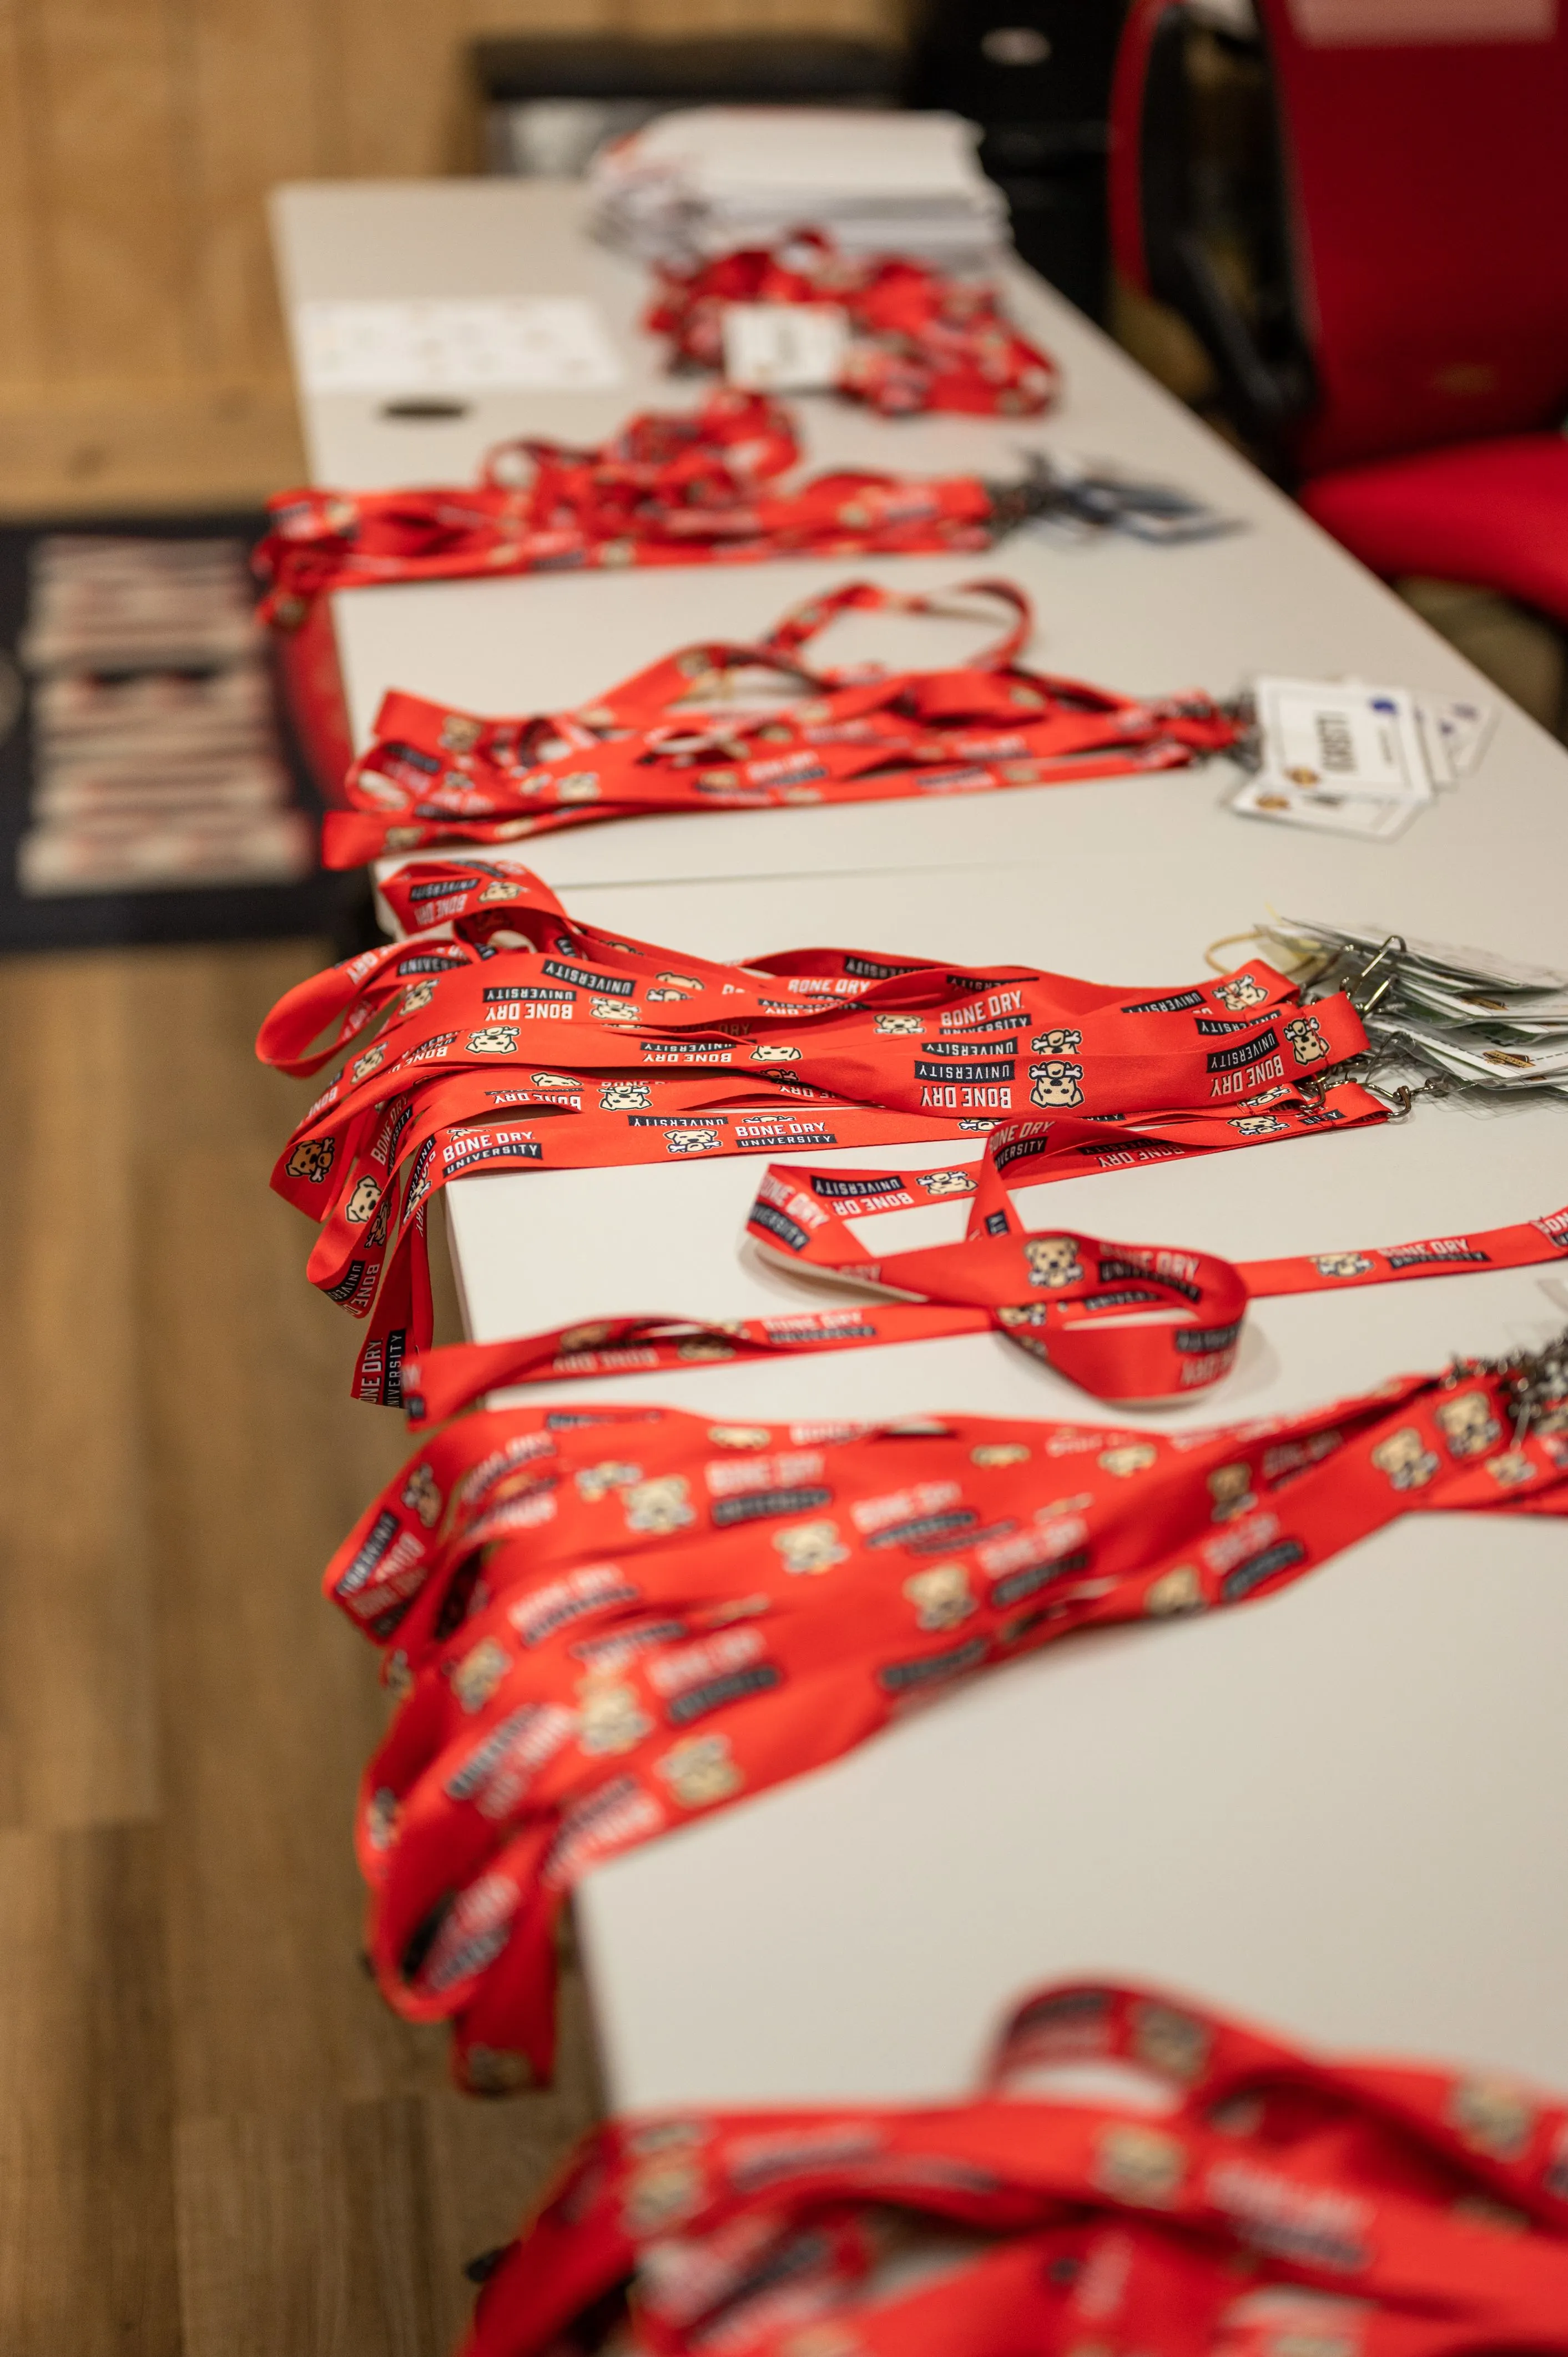 Table with conference name tags and red lanyards laid out in preparation for an event.